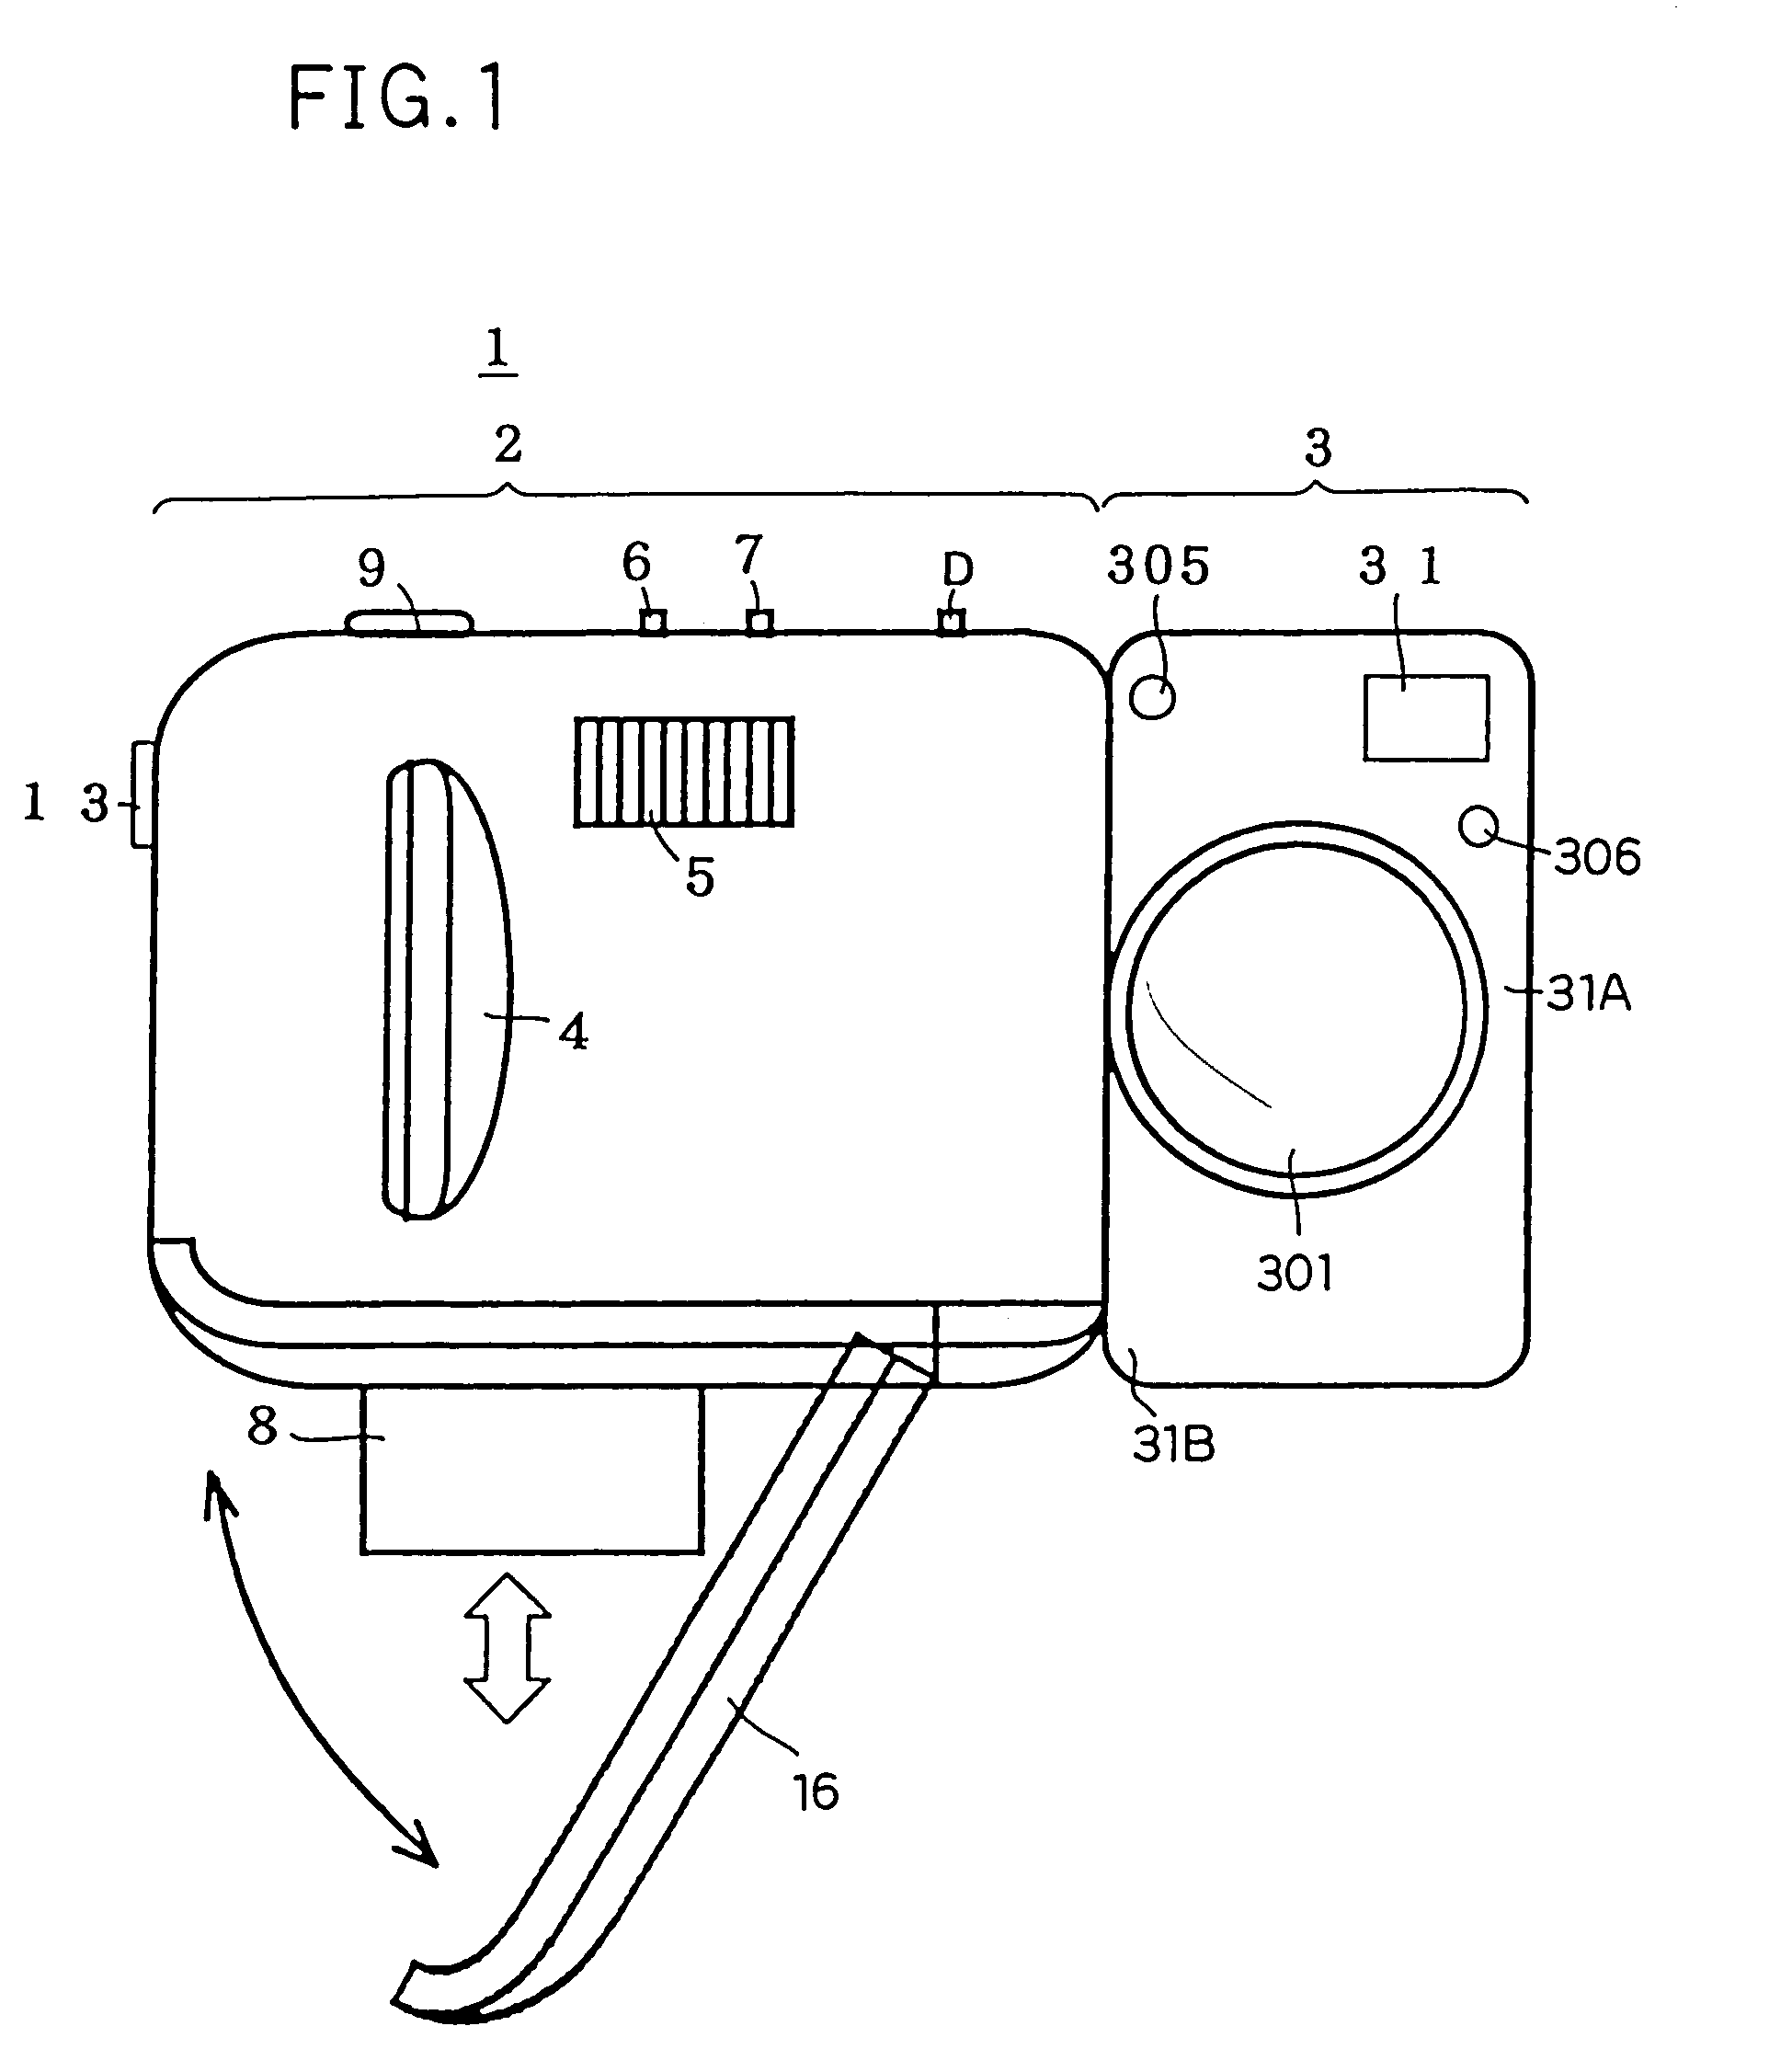 Digital camera having controller for reducing occurrences of blur in displayed images